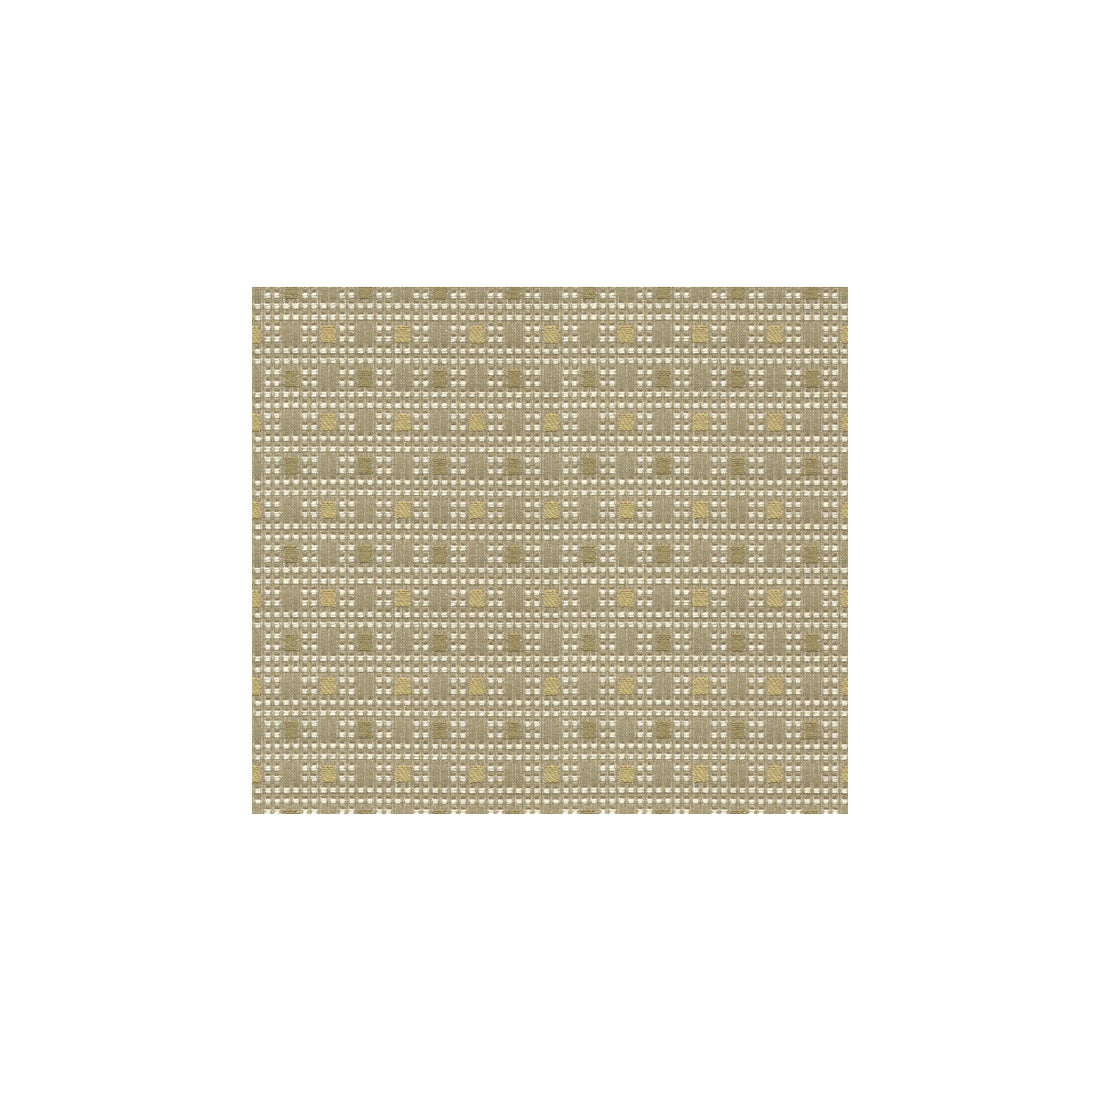 Check Out fabric in lemongrass color - pattern 32911.106.0 - by Kravet Contract in the Contract Gis collection